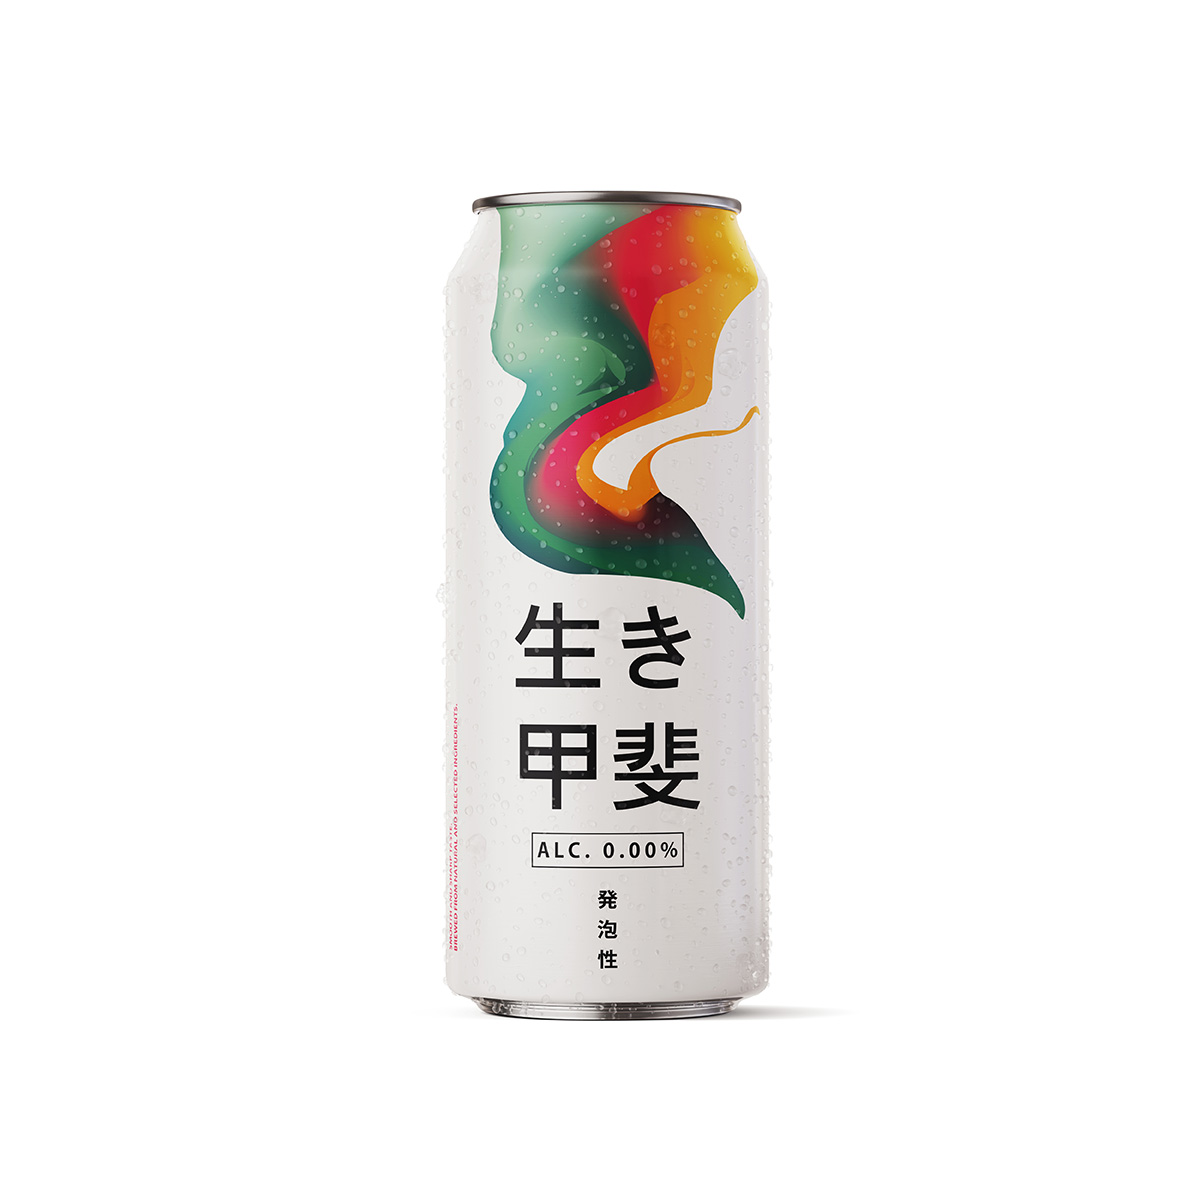 Japanese non-alcoholic beer 500 ml